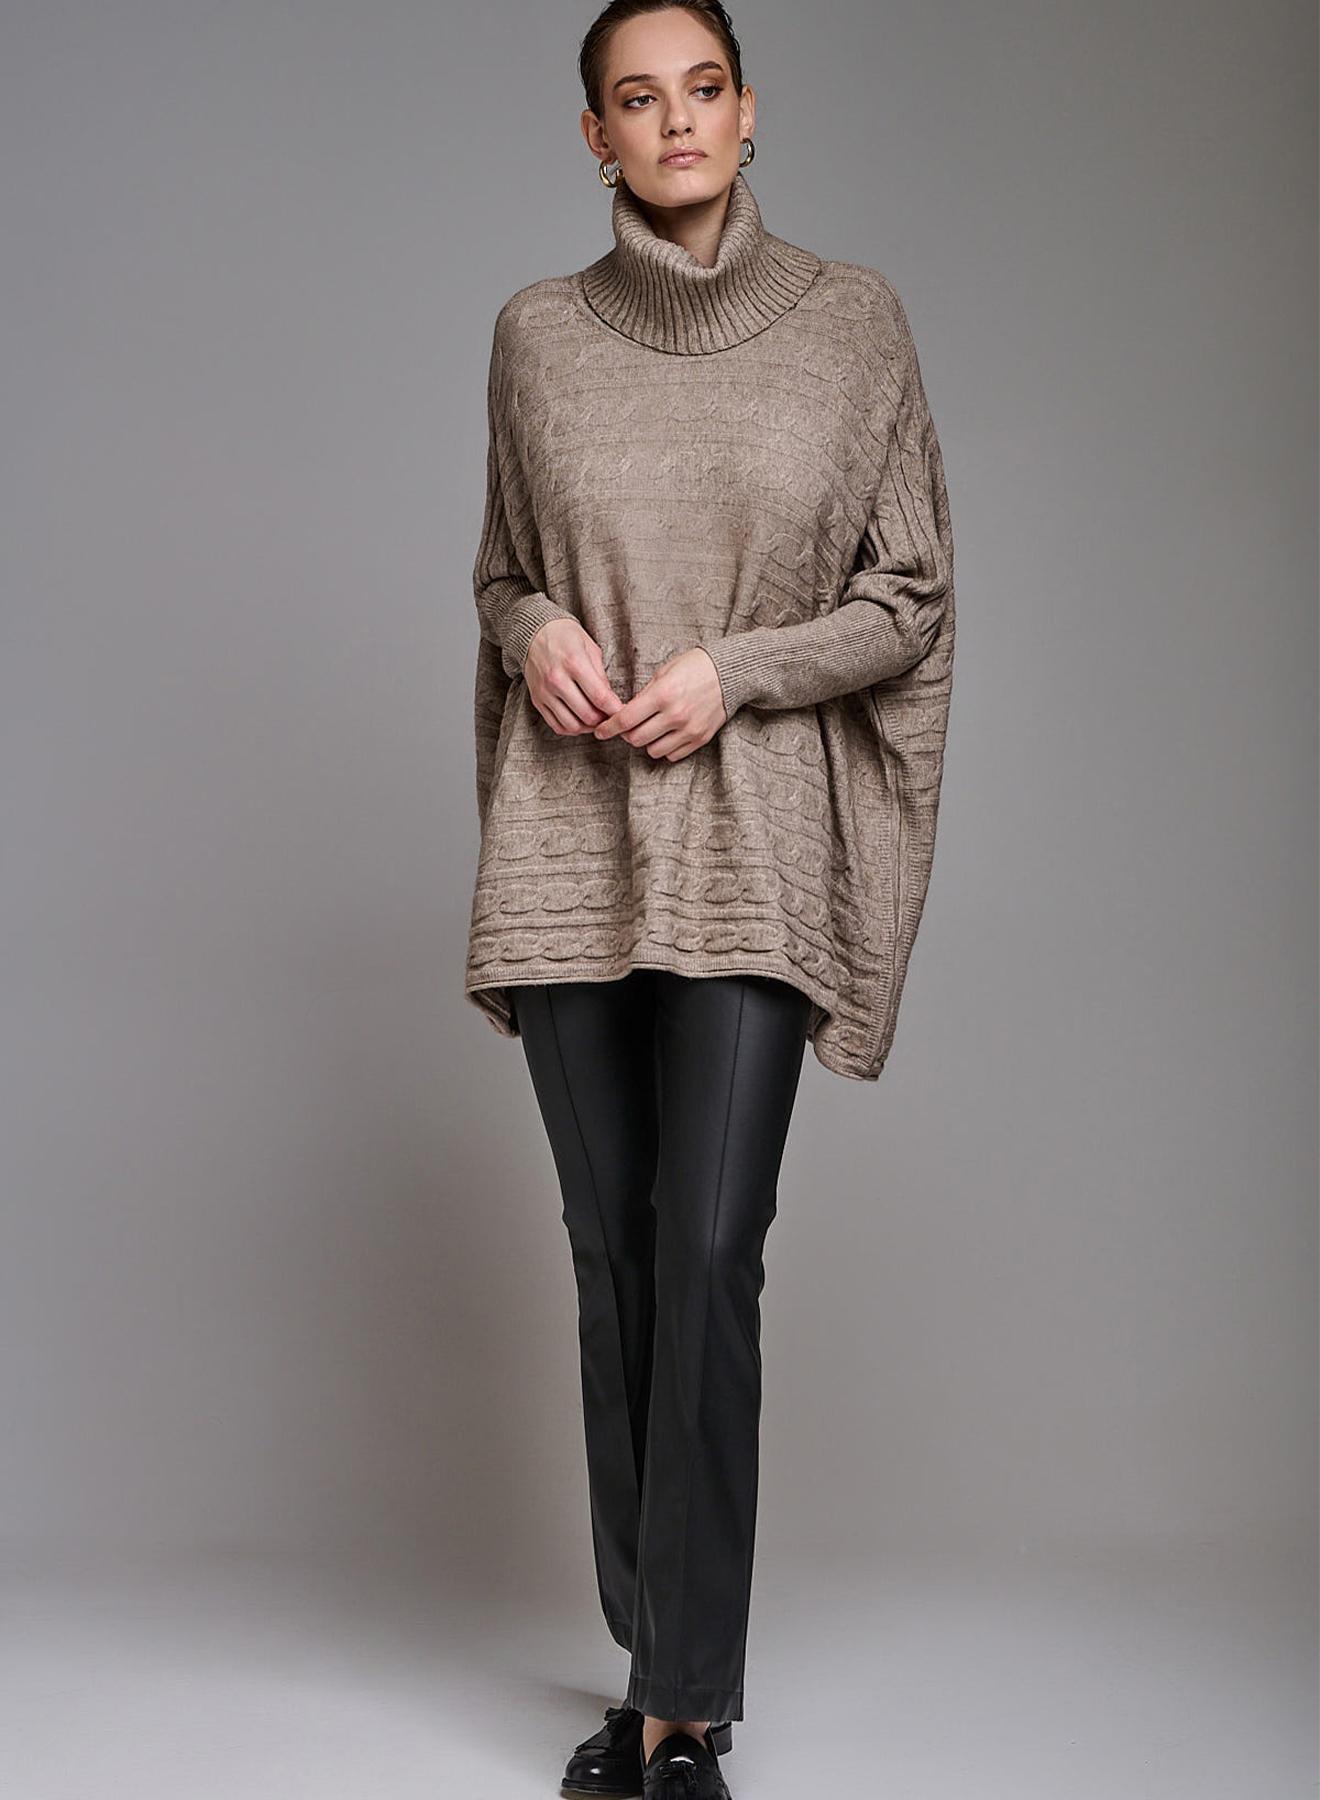 Oversized turtleneck sweater with textured details - 2